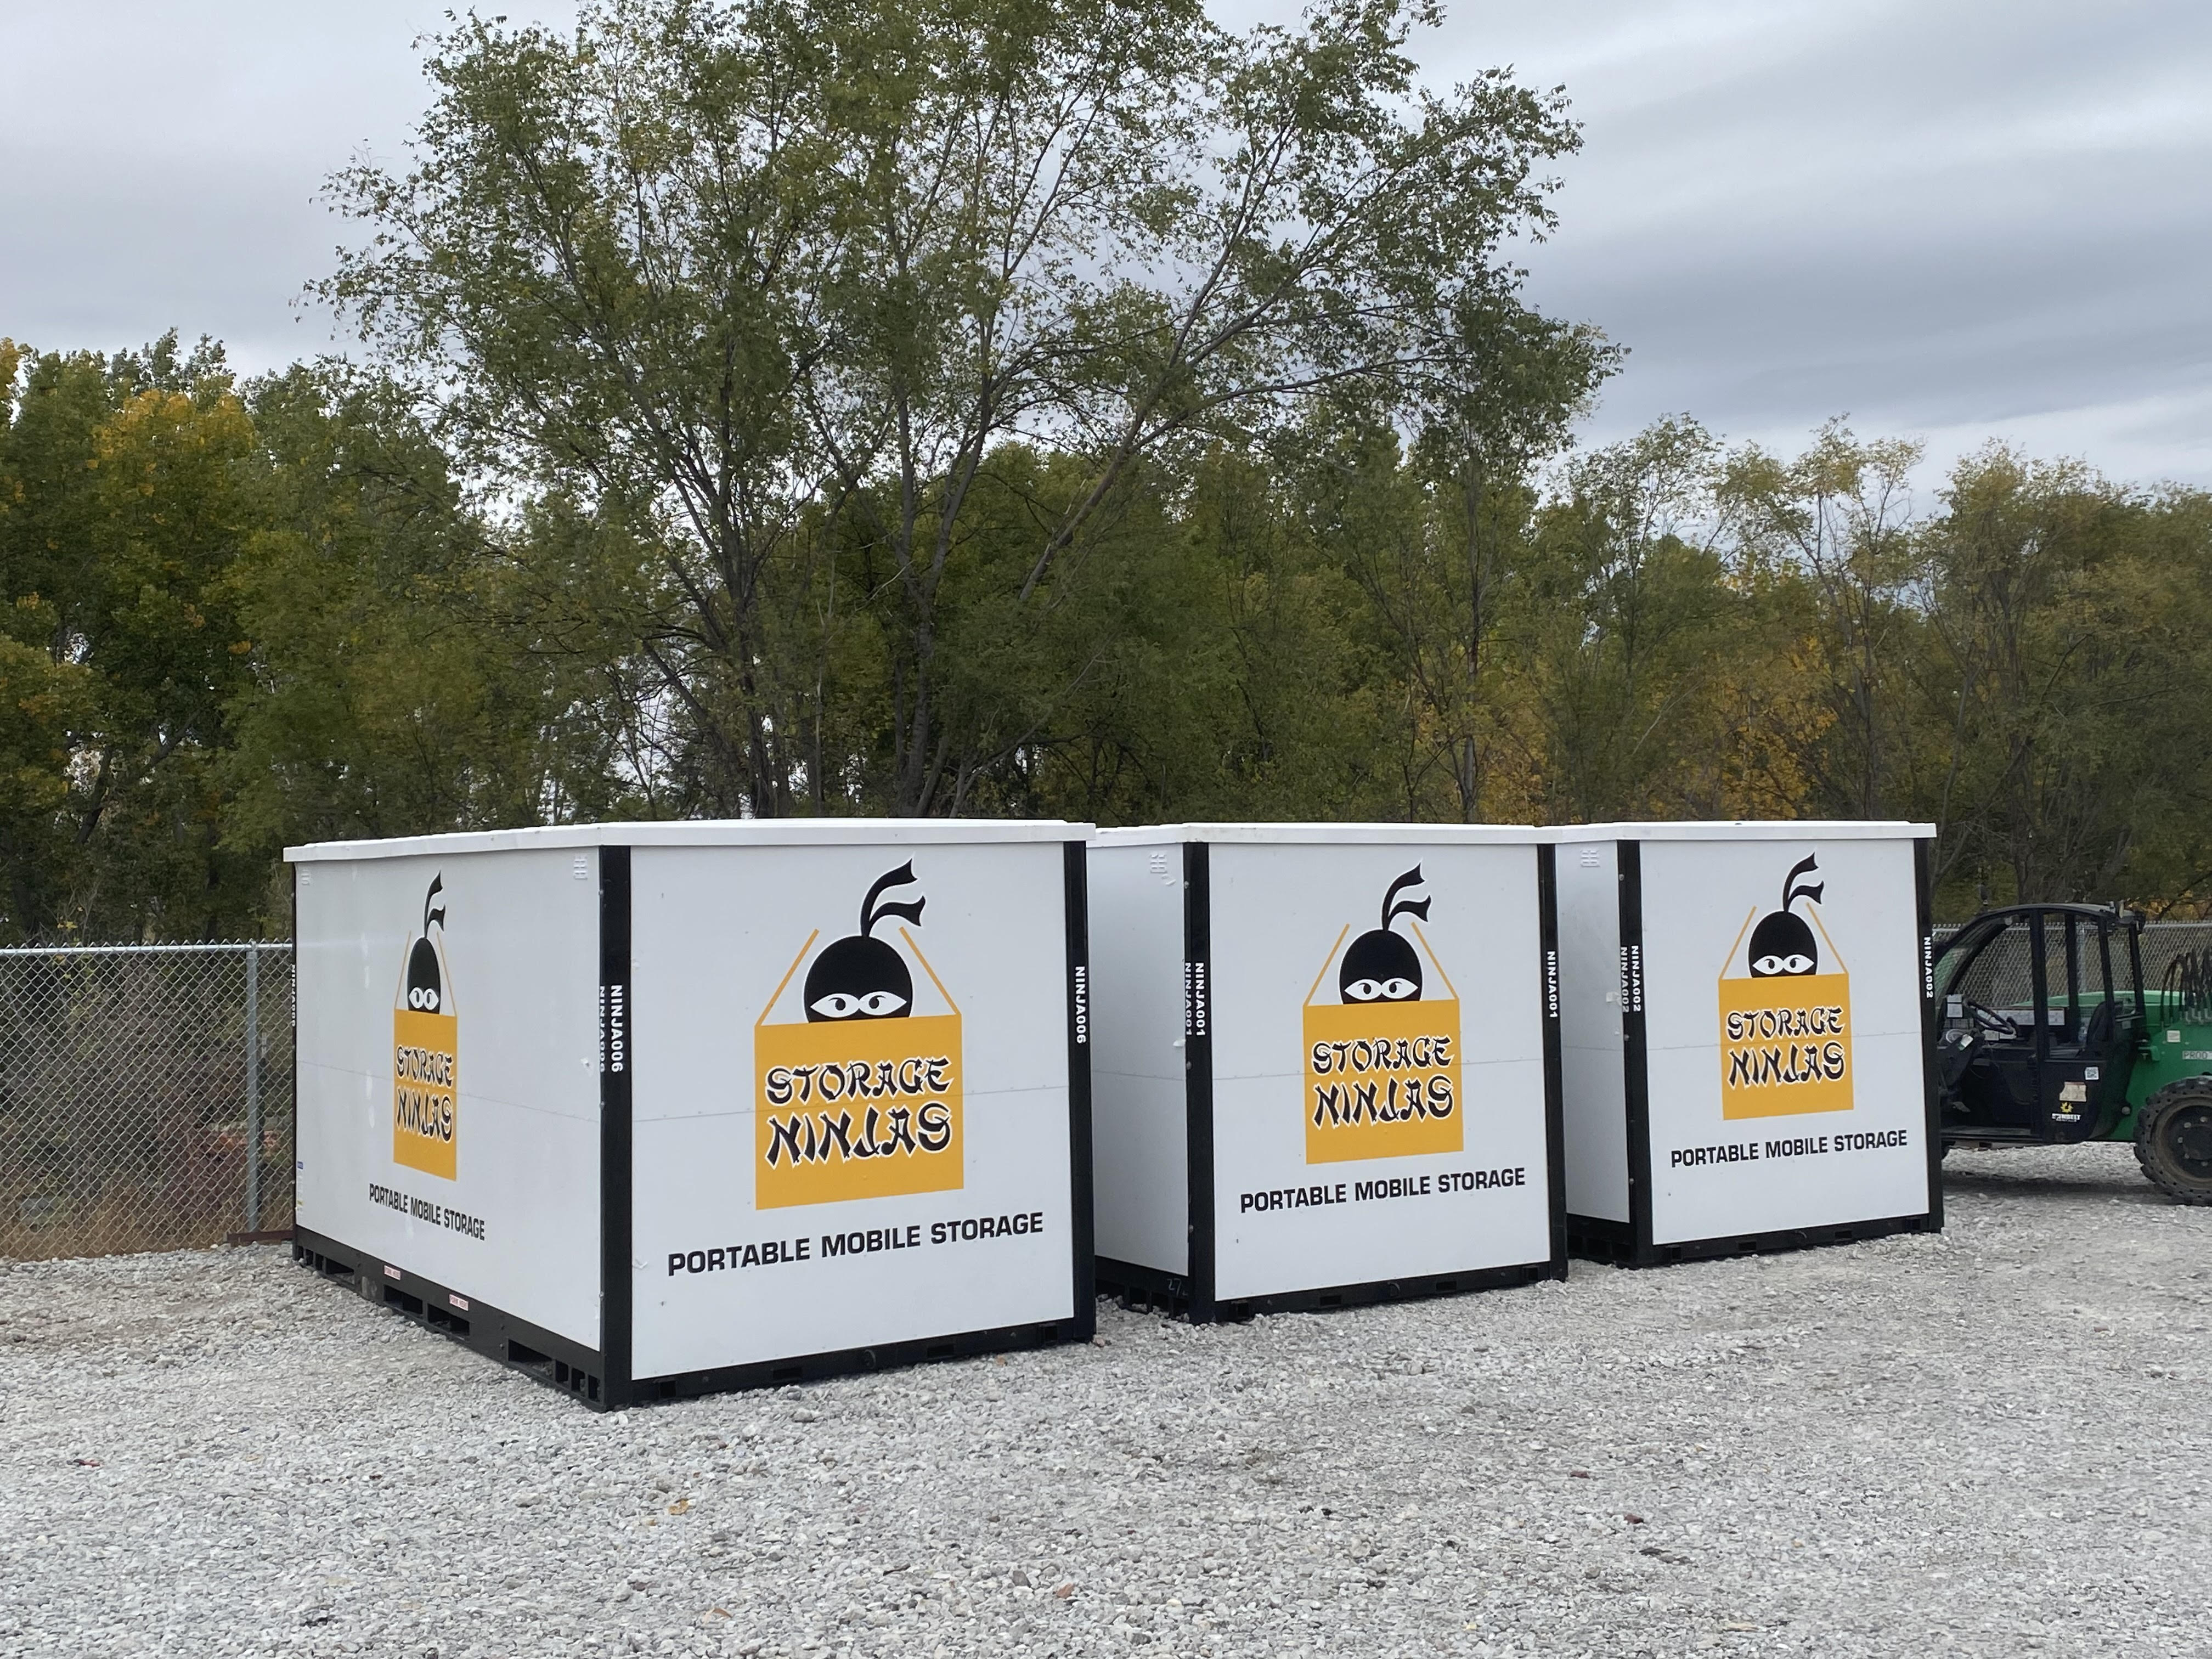 Storage Ninjas Ashland brings Portable Storage Units to the storage facility for mobile storage solutions.